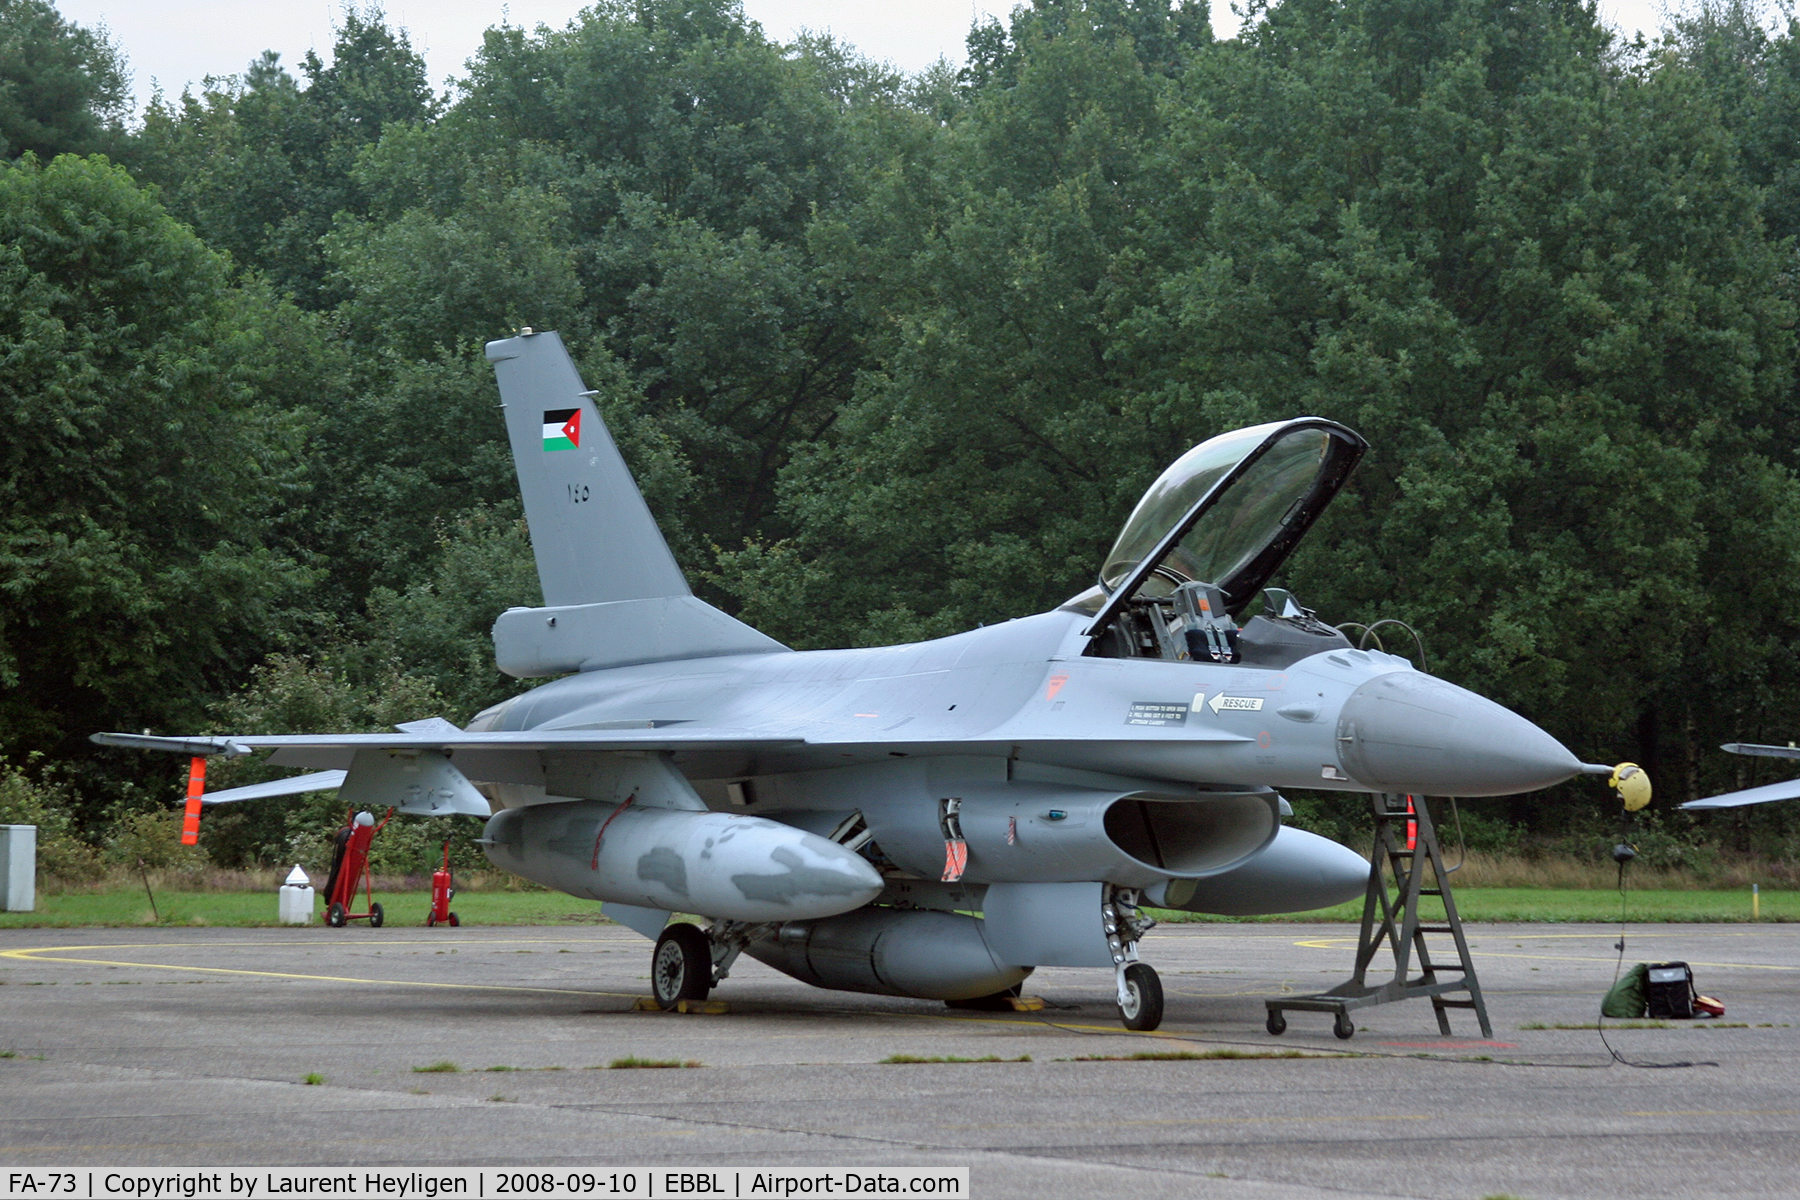 FA-73, 1984 SABCA F-16AM Fighting Falcon C/N 6H-73, As '145' destined for the Royal Jordanian Air Force, departed Kleine Brogel on 10-9-2008.